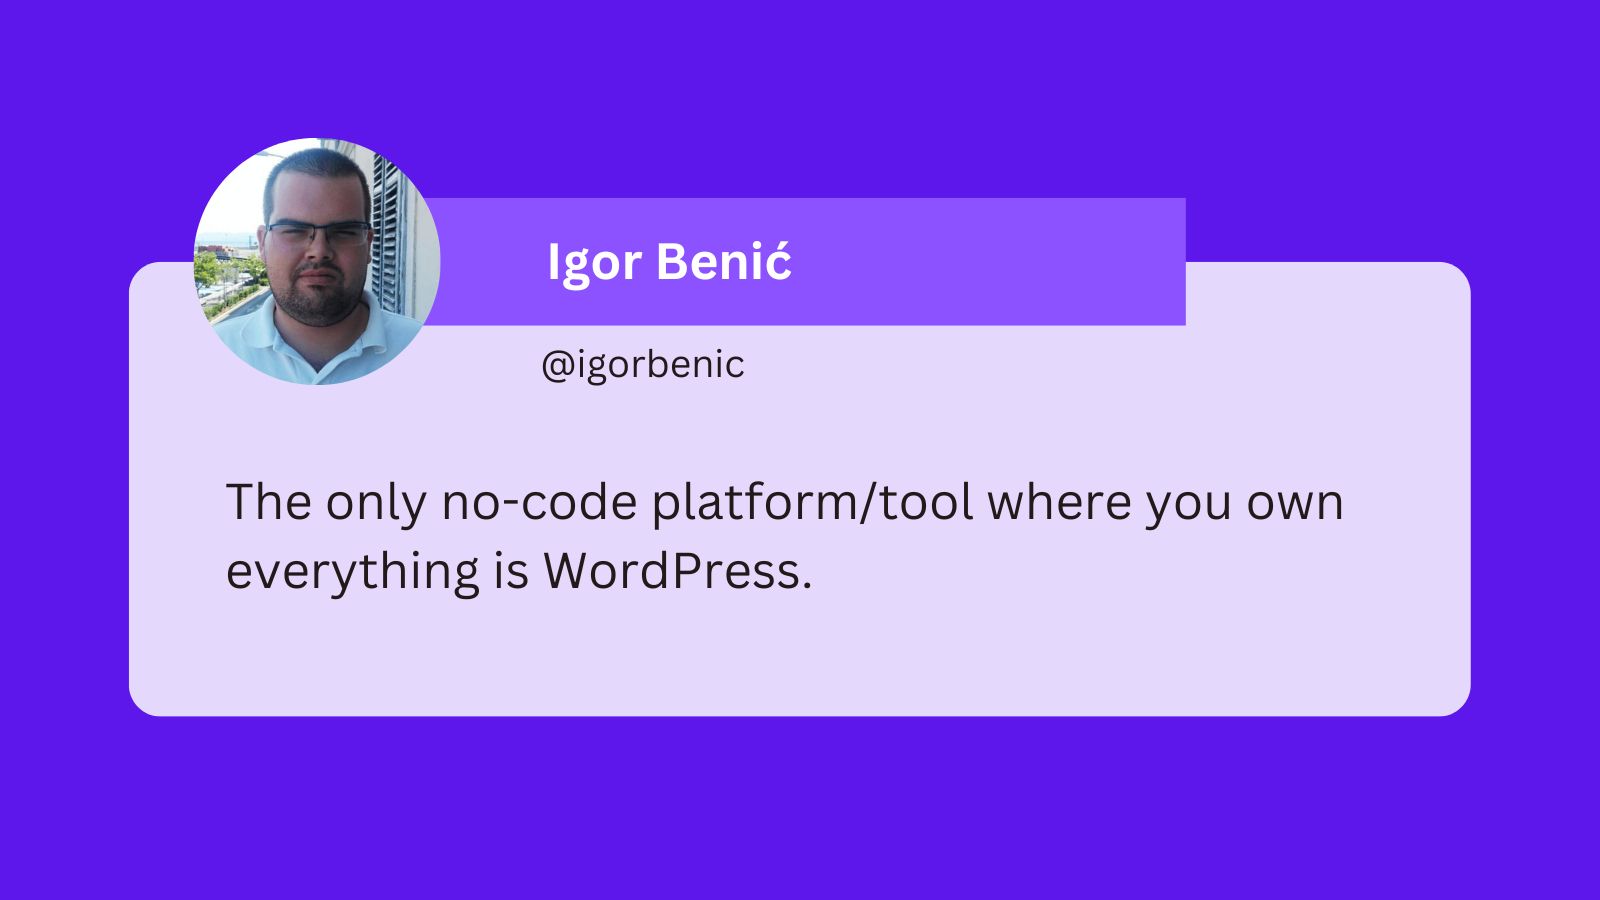 A tweet from Igor Benić that says: The only no-code platform/tool where you own everything is WordPress.